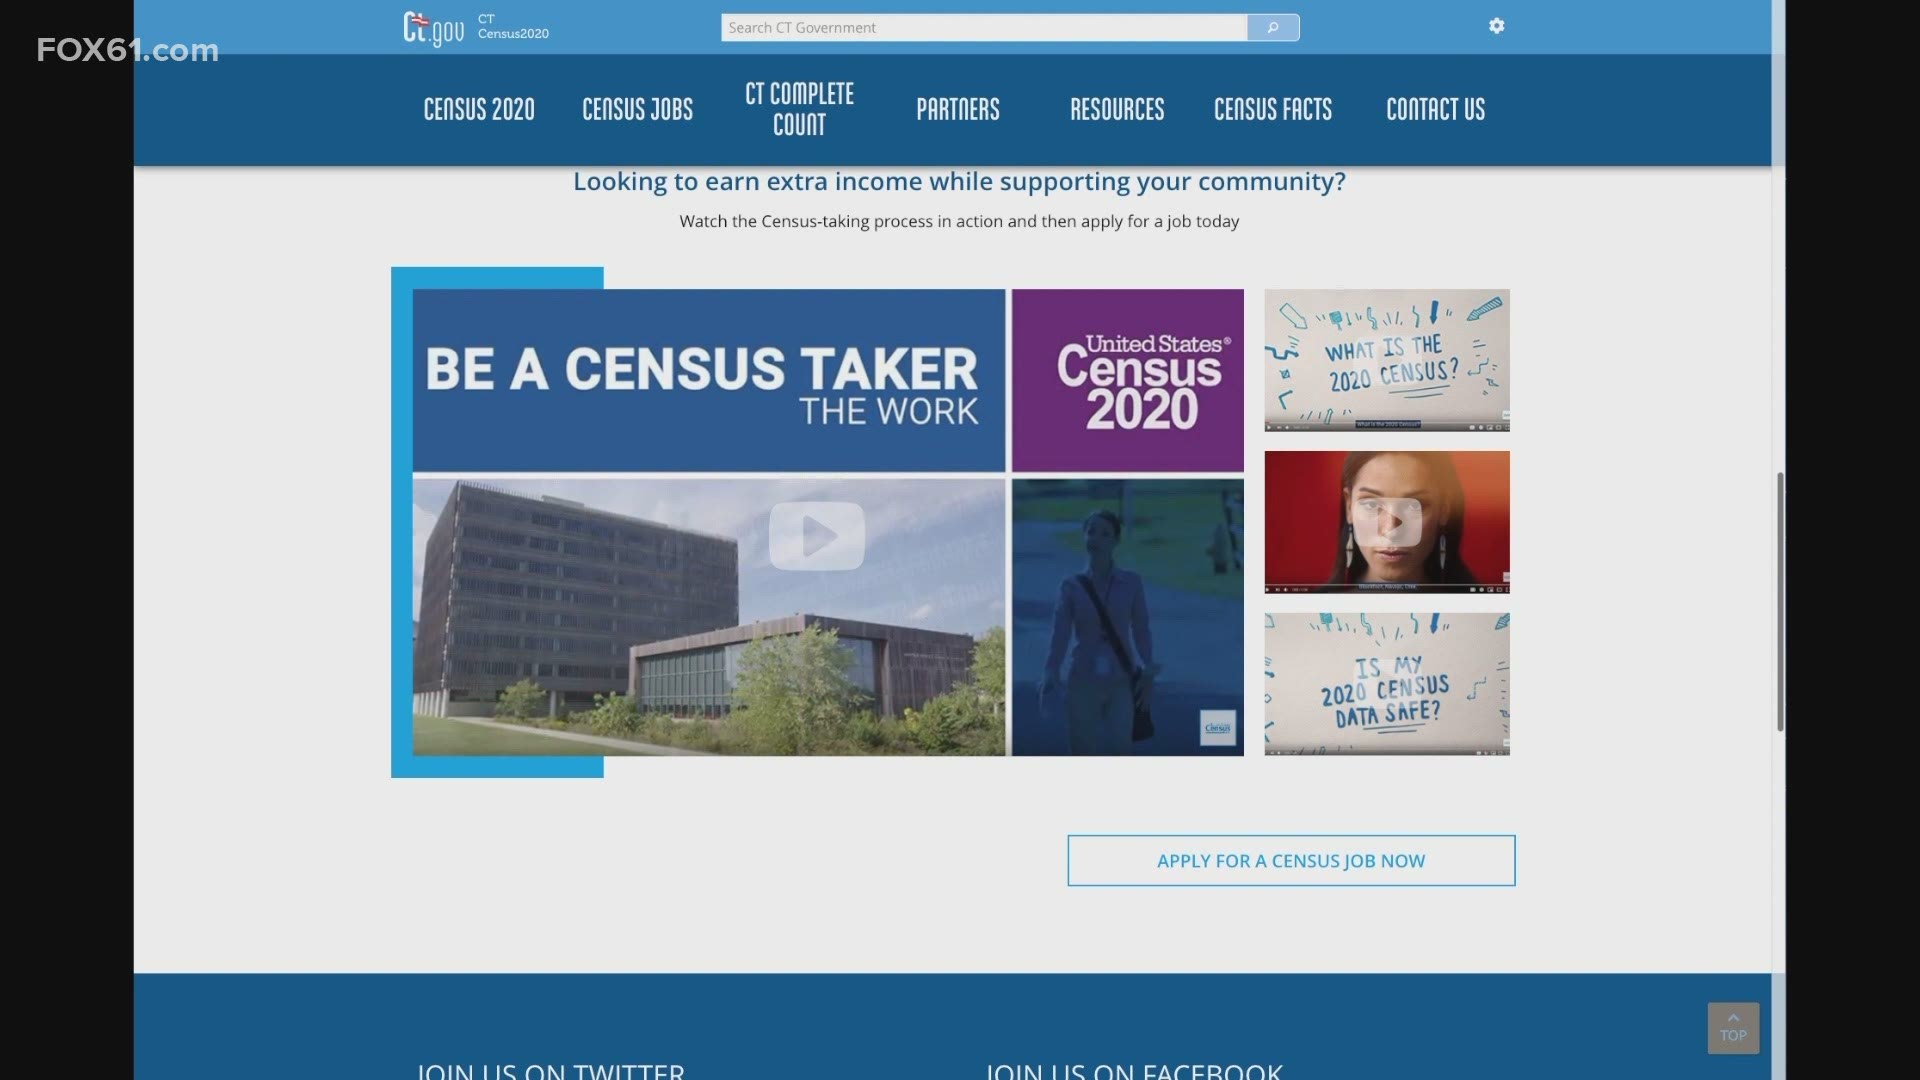 The Community Renewal Team said they are happy with a California federal judge's decision to give federal census counters more time to finish their work.